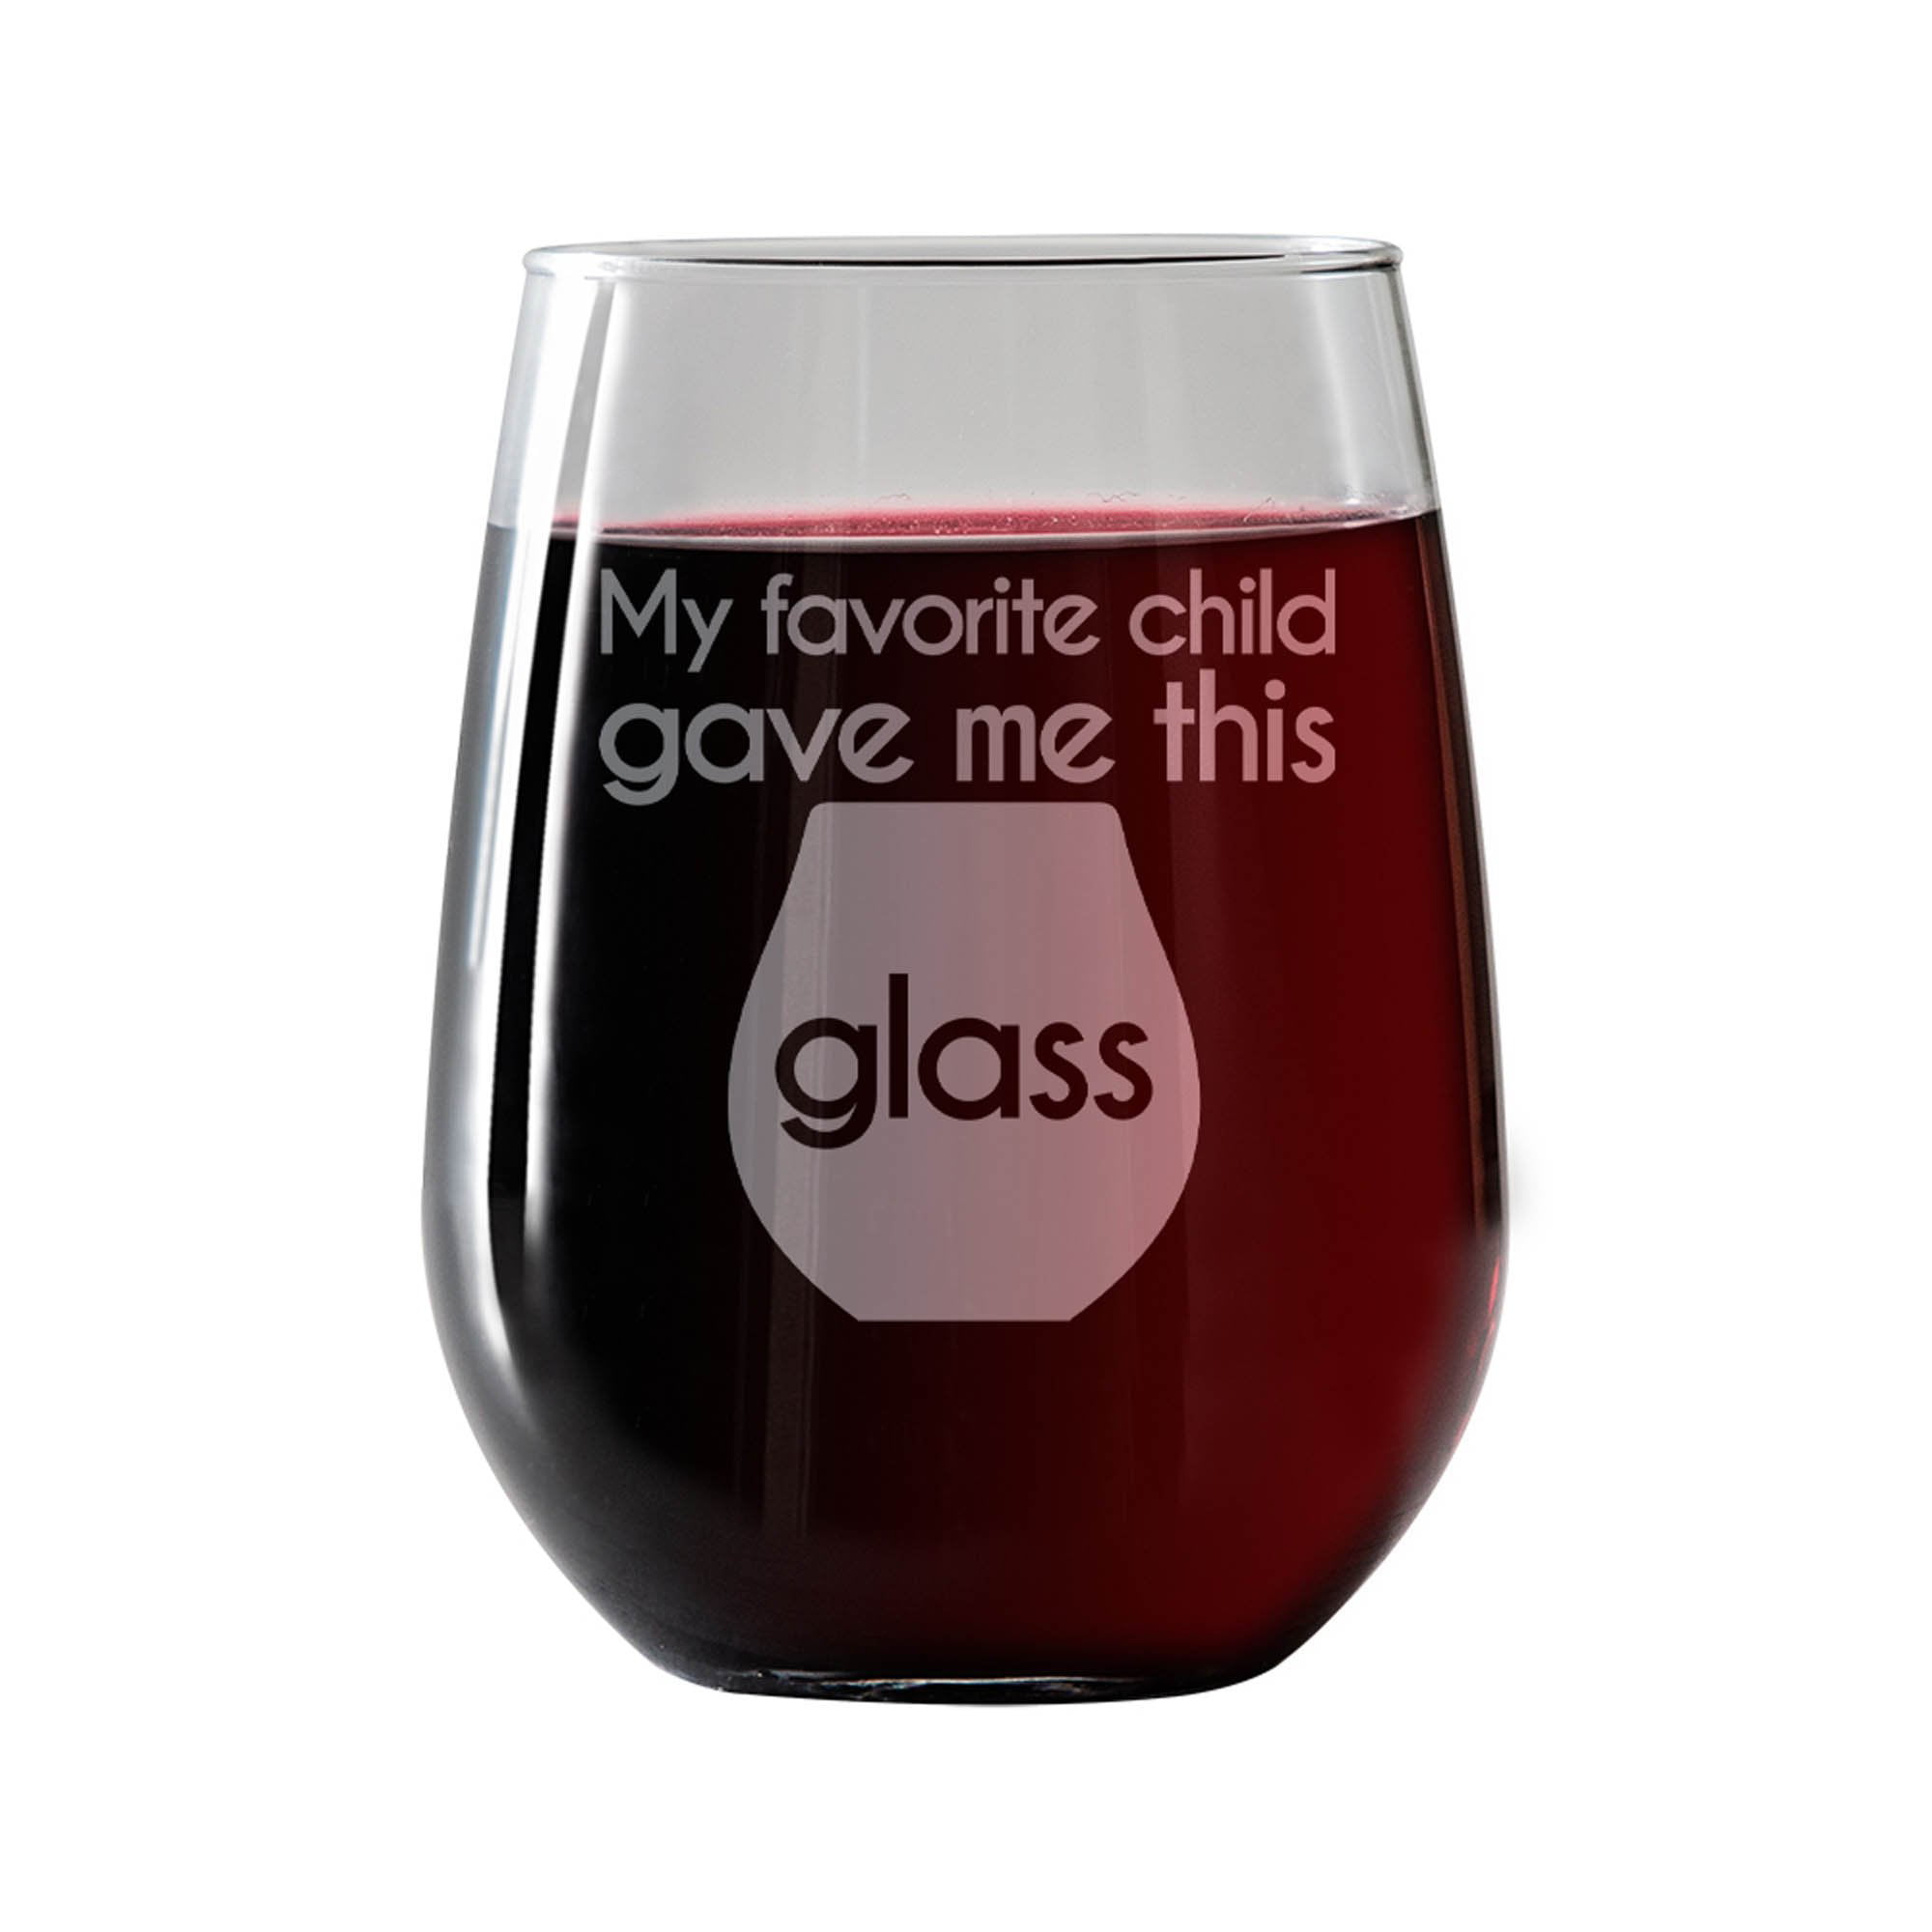 Best Mom & Dad Gifts My Favorite Child Gave Me This Funny Wine Glass Son Kids 21 OZ Christmas Gift for Parents Gag Present Idea from Daughter 